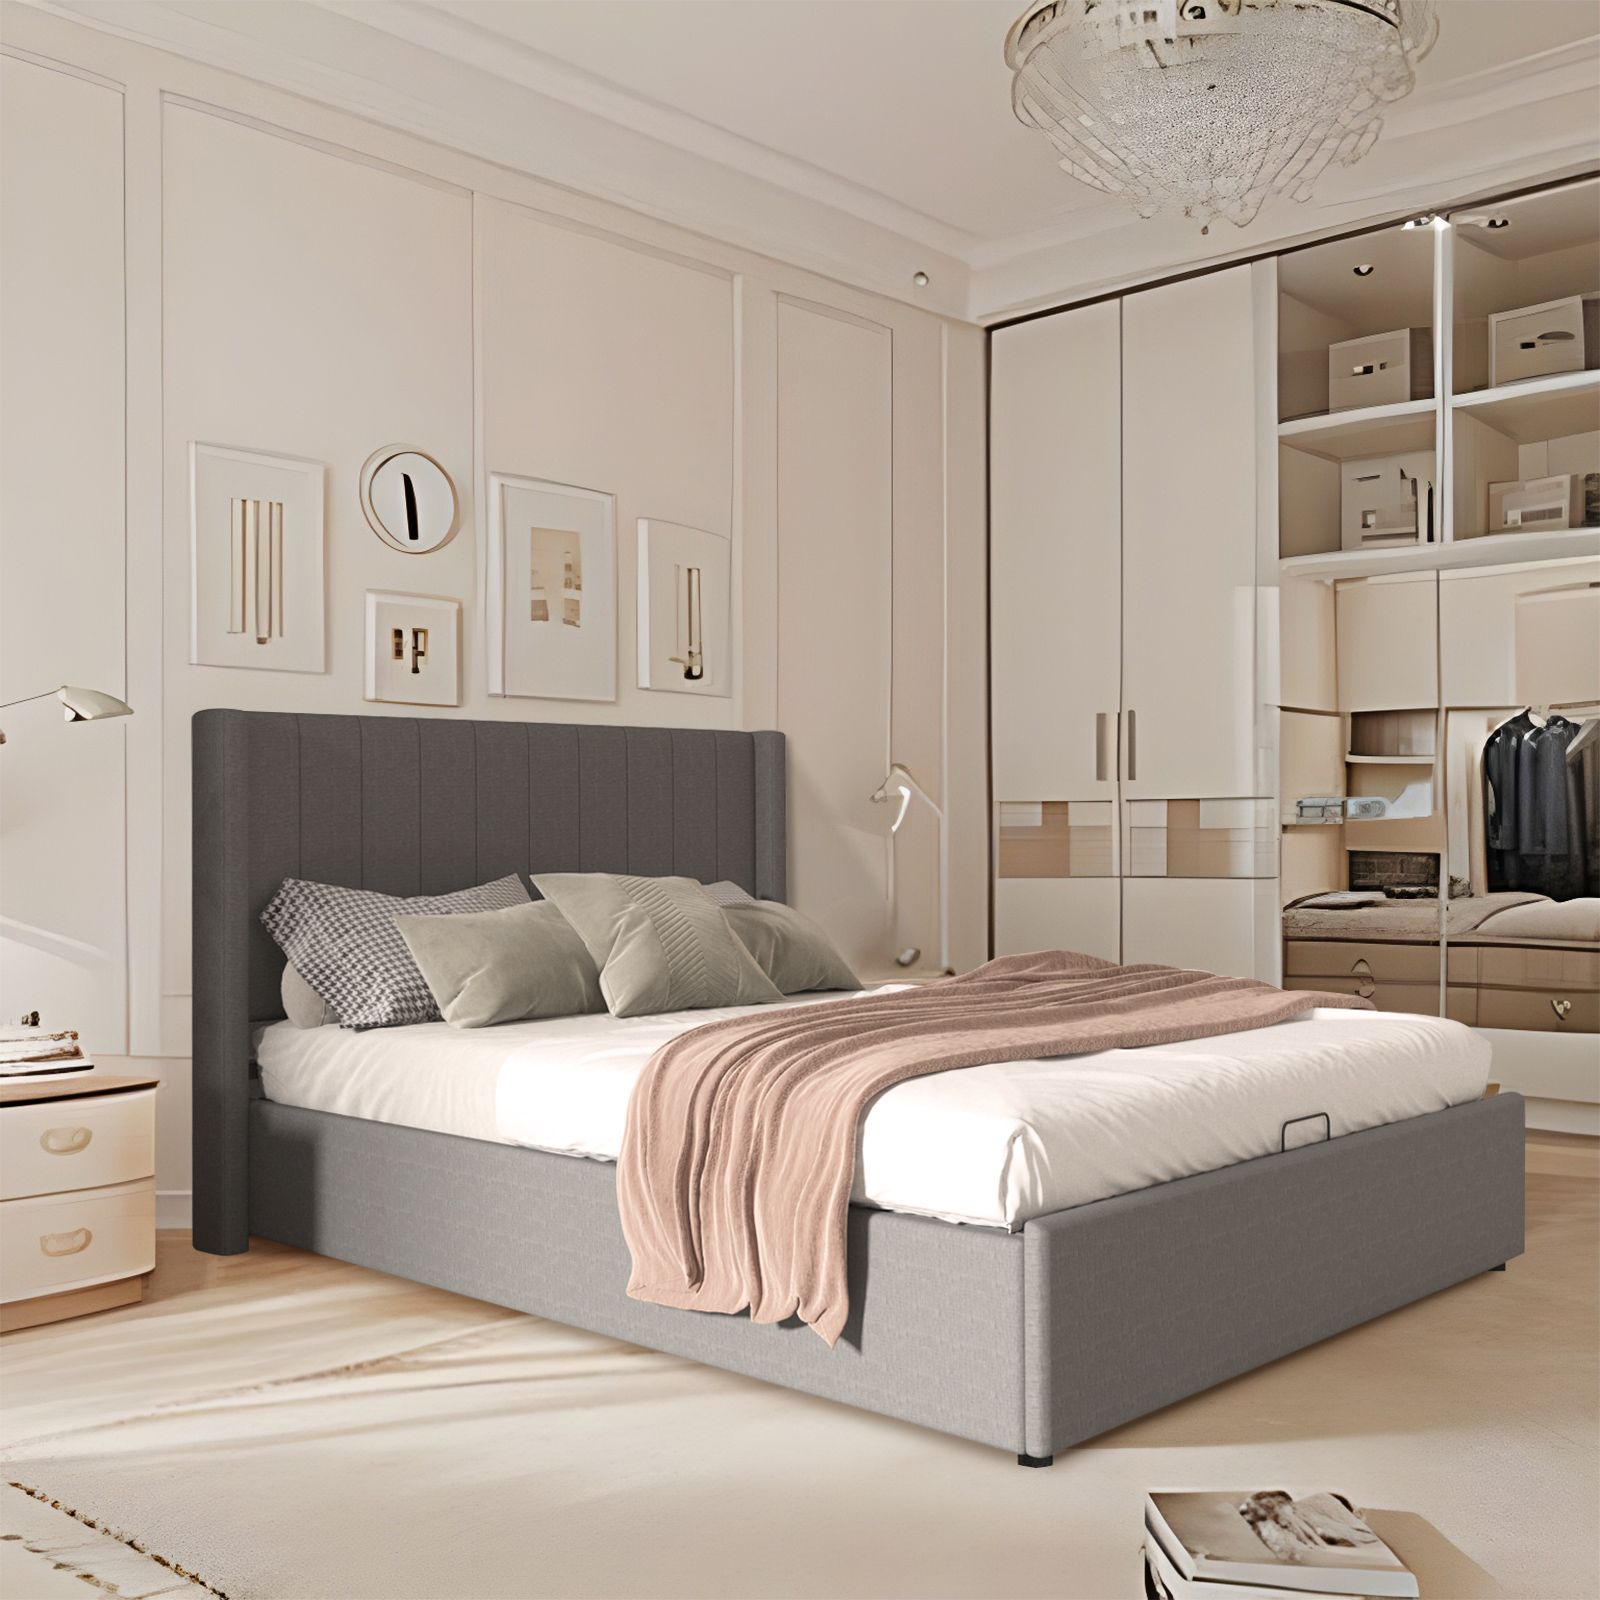 Wooden Bed Frame Queen Size Mattress Base Platform Gas Lift Up Underbed Storage Upholstered Fabric Wingback Headboard Bedroom Furniture Grey